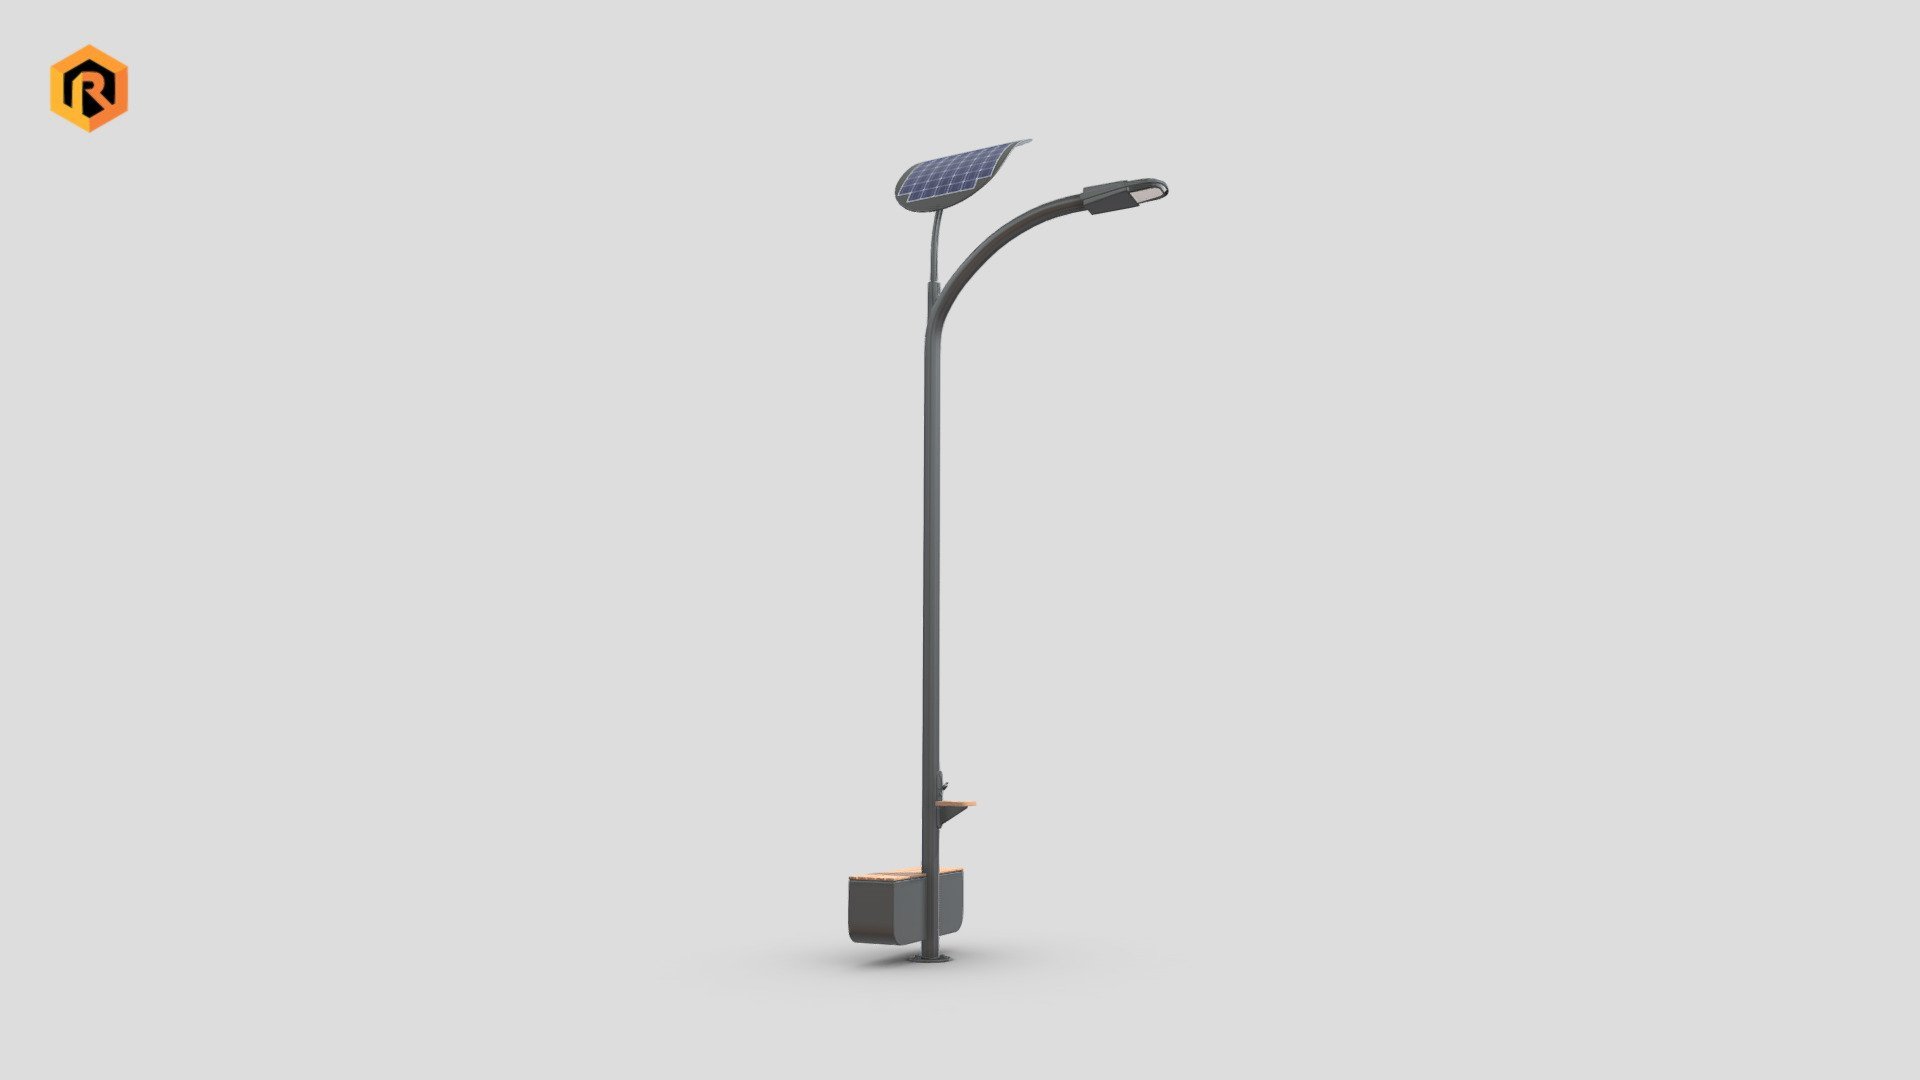 Low-poly PBR 3D Model of Solar LED Street Light with bench and USB Charge port on pole.

Solar street lights are raised light sources which are powered by photovoltaic panels mounted on the lighting structure. 

The photovoltaic panels charge a rechargeable battery, which powers a lamp during the night. 

This 3d model is best for use in games and other real-time applications such as Unity or Unreal Engine.   

Technical details:




3 PBR textures sets

3796 Triangles

Model completely unwrapped

Lot of additional file formats included (Blender, Unity, Maya etc.)

PBR textures details:




2048 Main Body texture set (Albedo, Metallic, Smoothness, Normal, AO)

512 Light texture set (Albedo, Metallic, Smoothness, Normal)

512 Glass texture set (Albedo, Metallic, Smoothness, Normal)

More file formats are available in additional zip file on product page.  

Please feel free to contact me if you have any questions or need any support for this asset.

Support e-mail: support@rescue3d.com - Solar Street Light - Buy Royalty Free 3D model by Rescue3D Assets (@rescue3d) 3d model